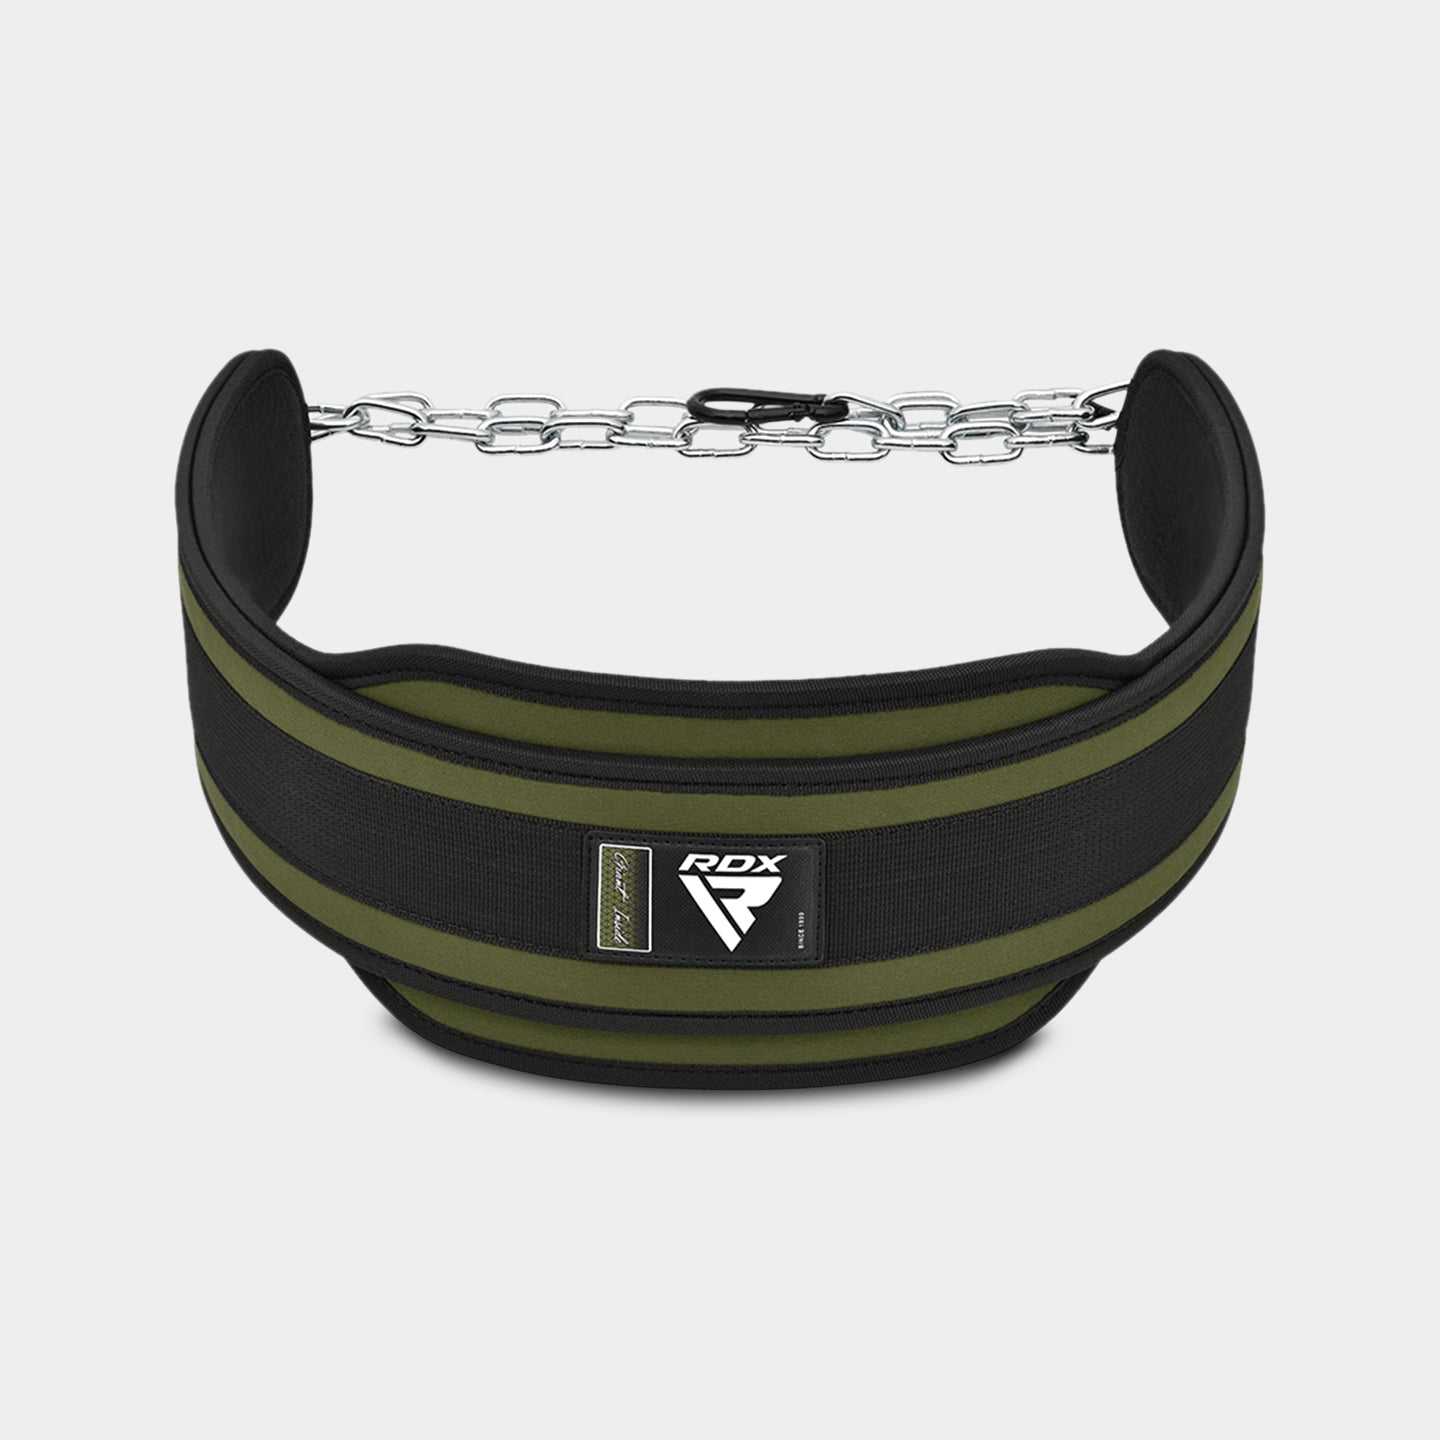 RDX Sports T7 Weight Training Dipping Belt With Chain, Standard Size, Army Green A1